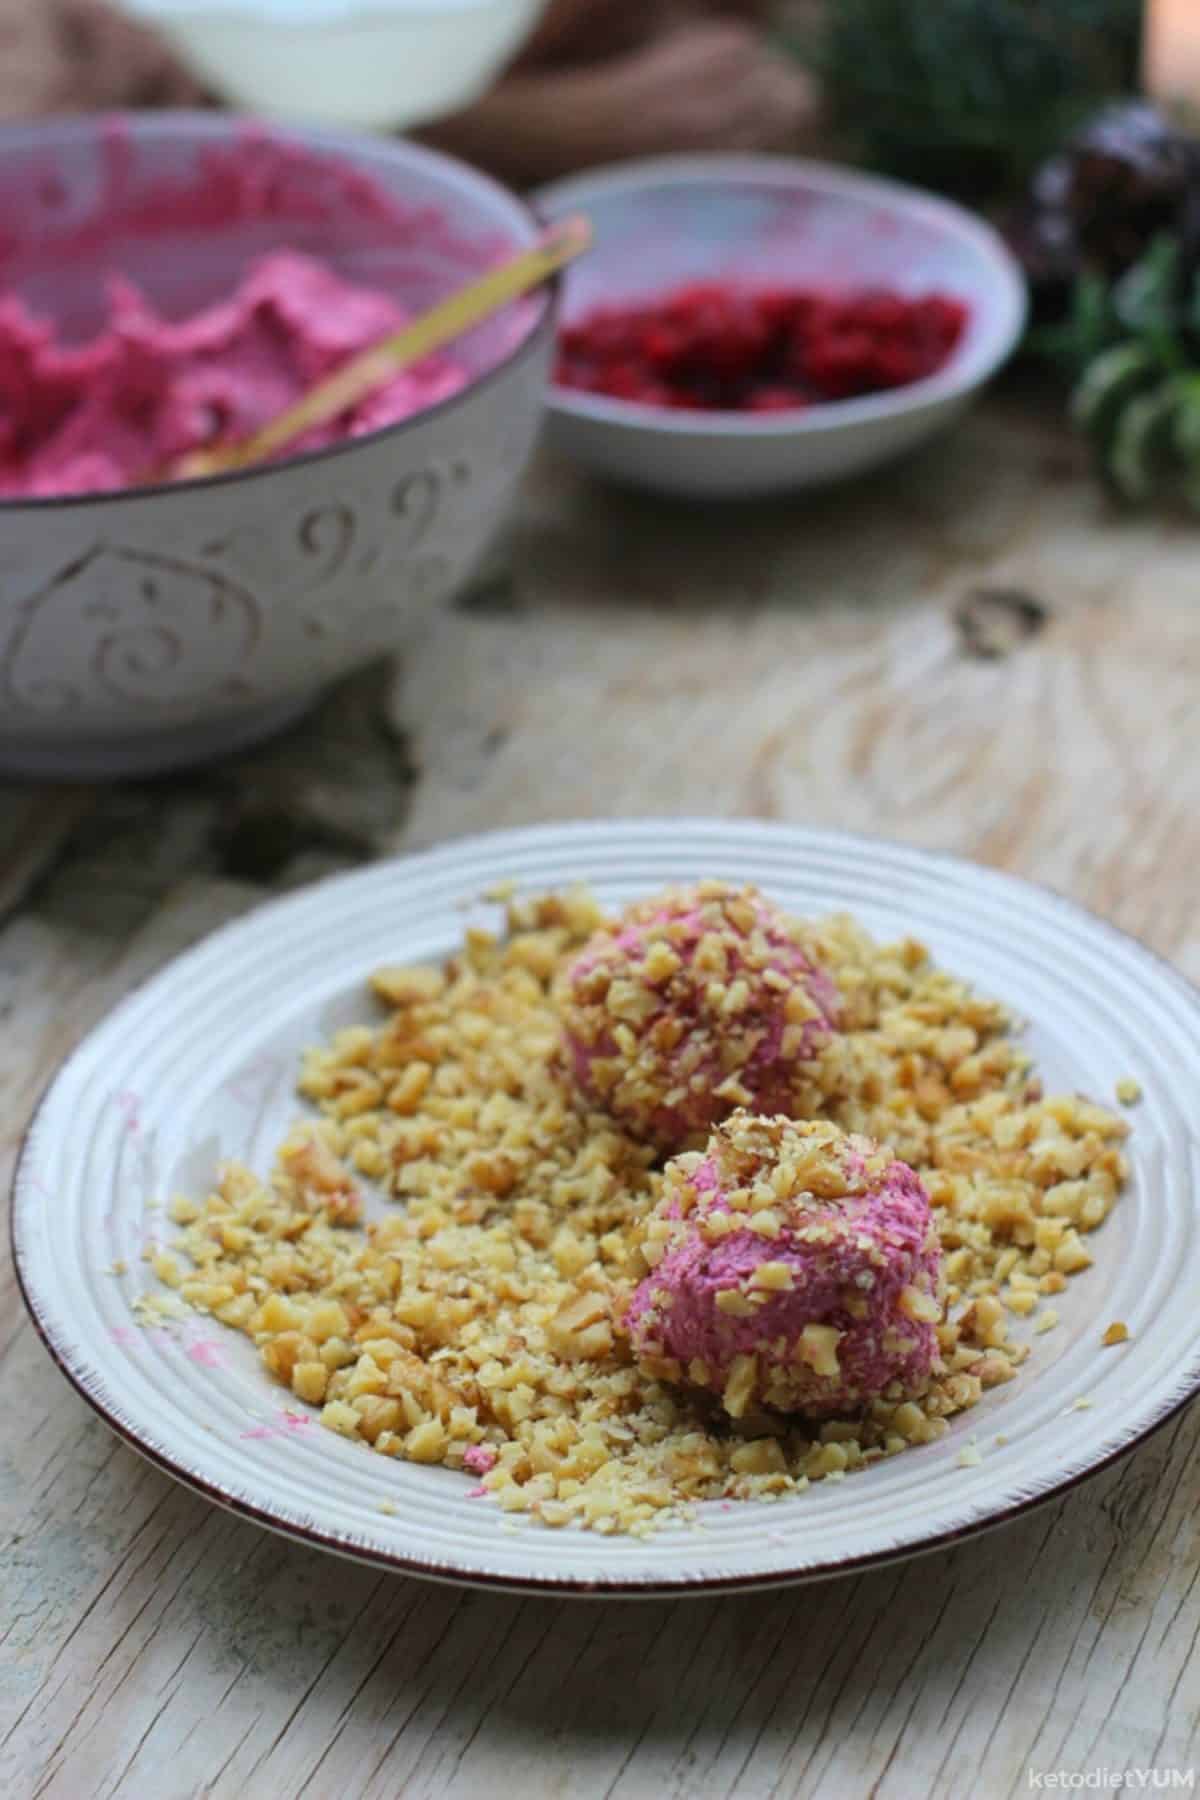 Rolling raspberry cheesecake bites in chopped walnuts on a white plate